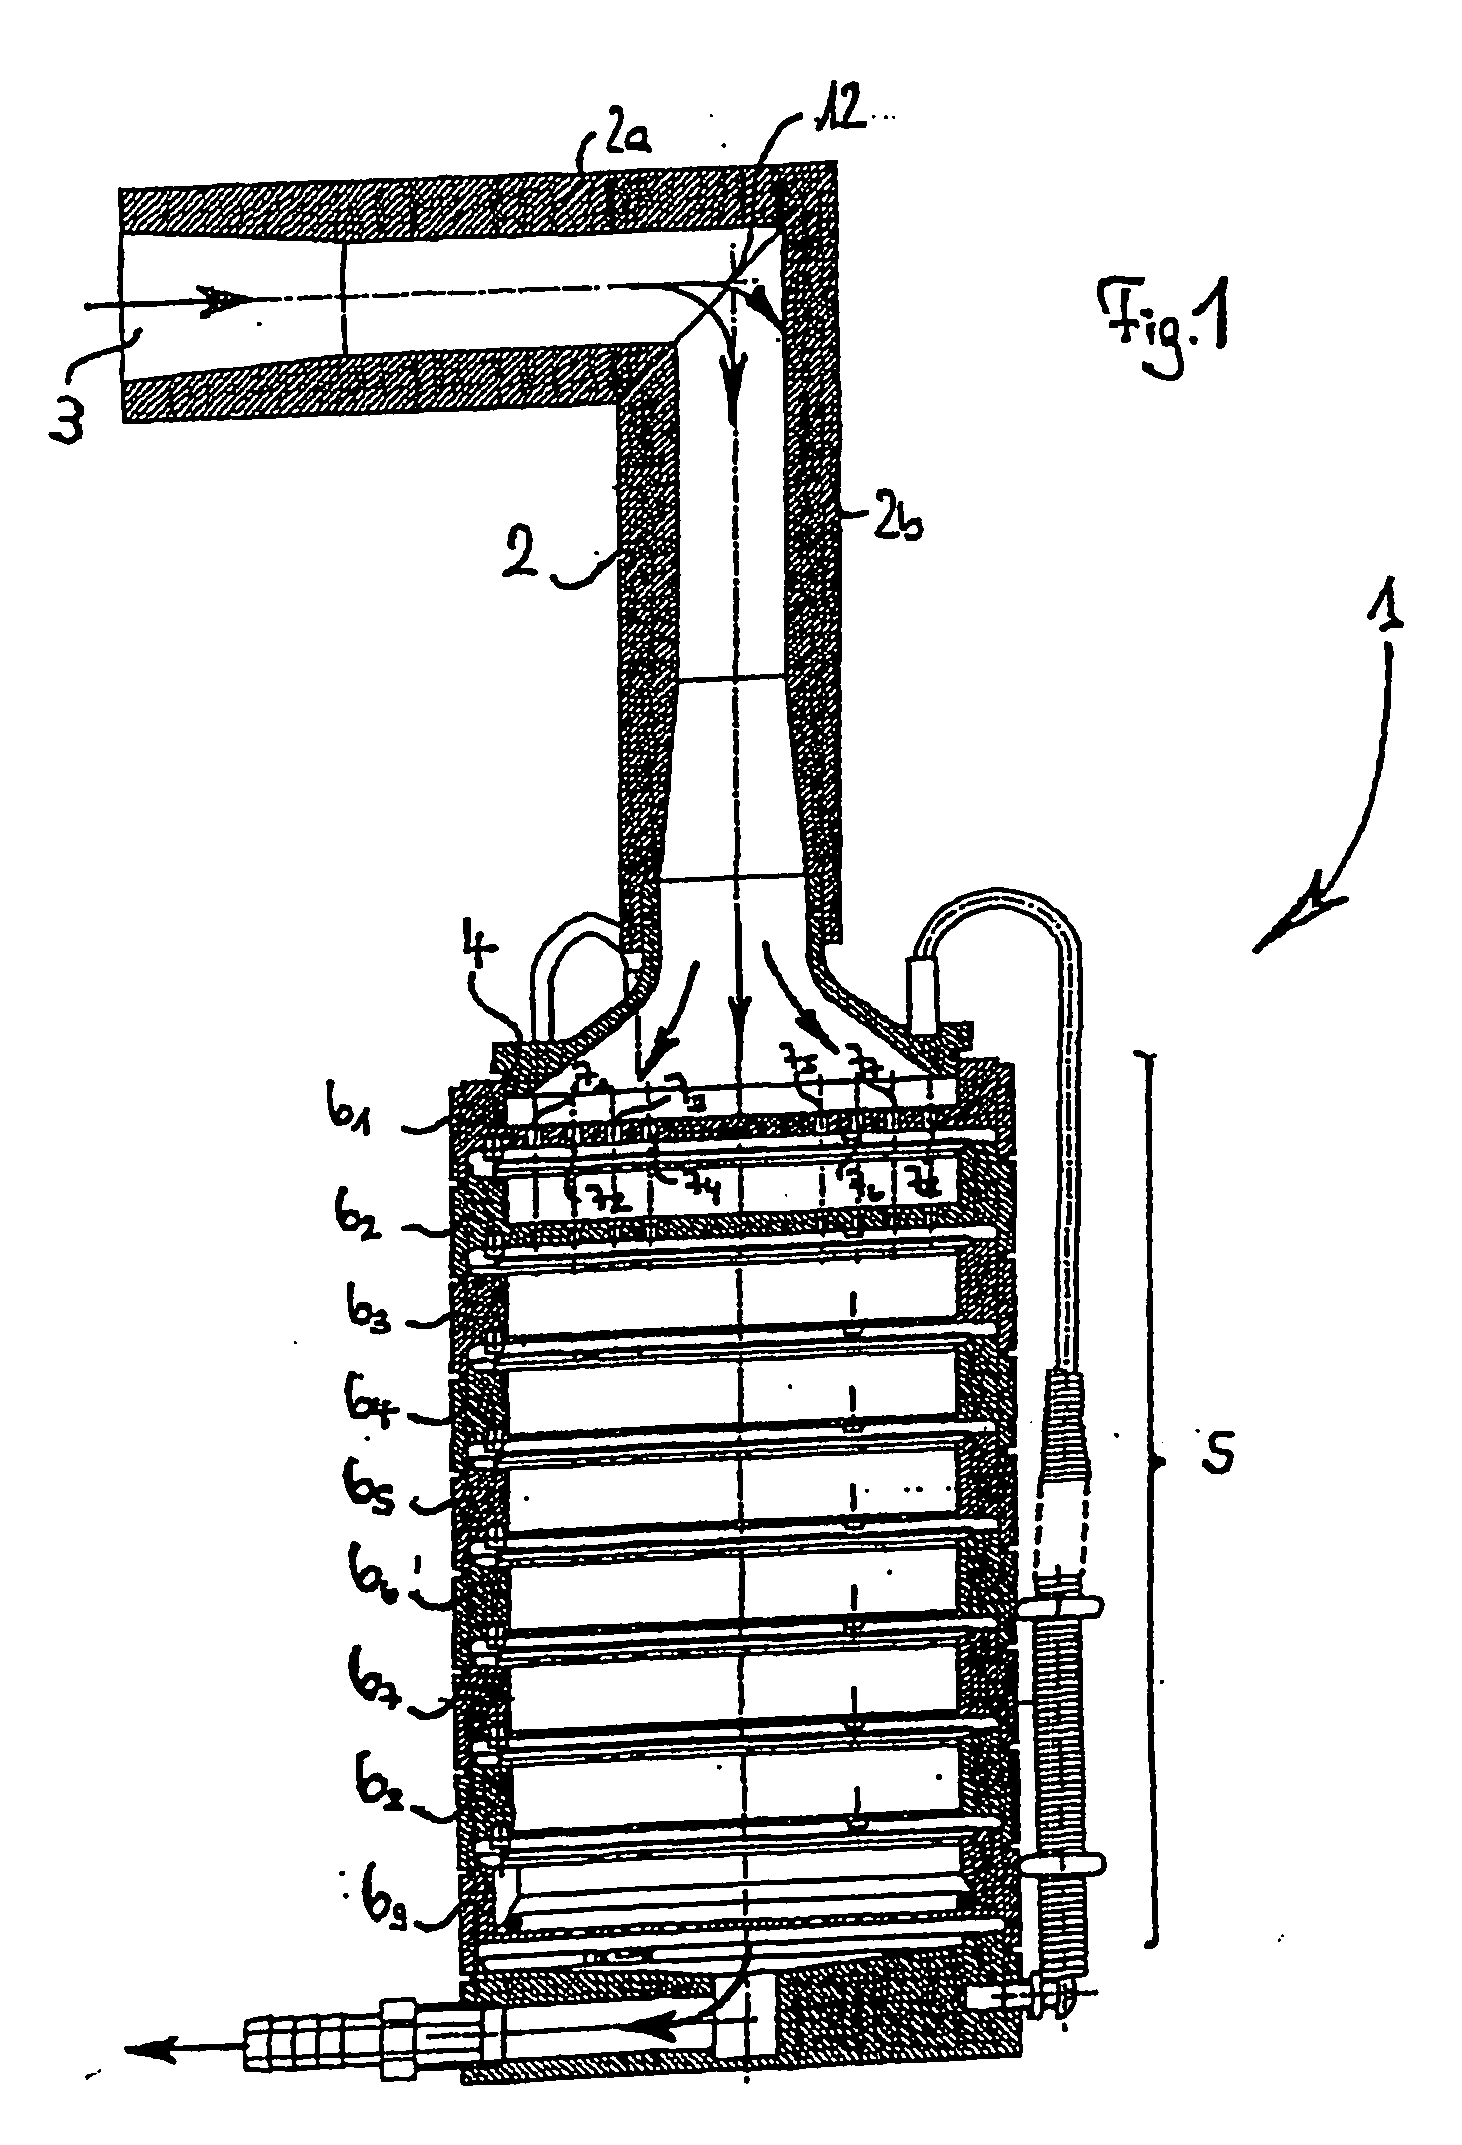 Process for Determining the particle size distribution of an aerosol and apparatus for carrying out such a process